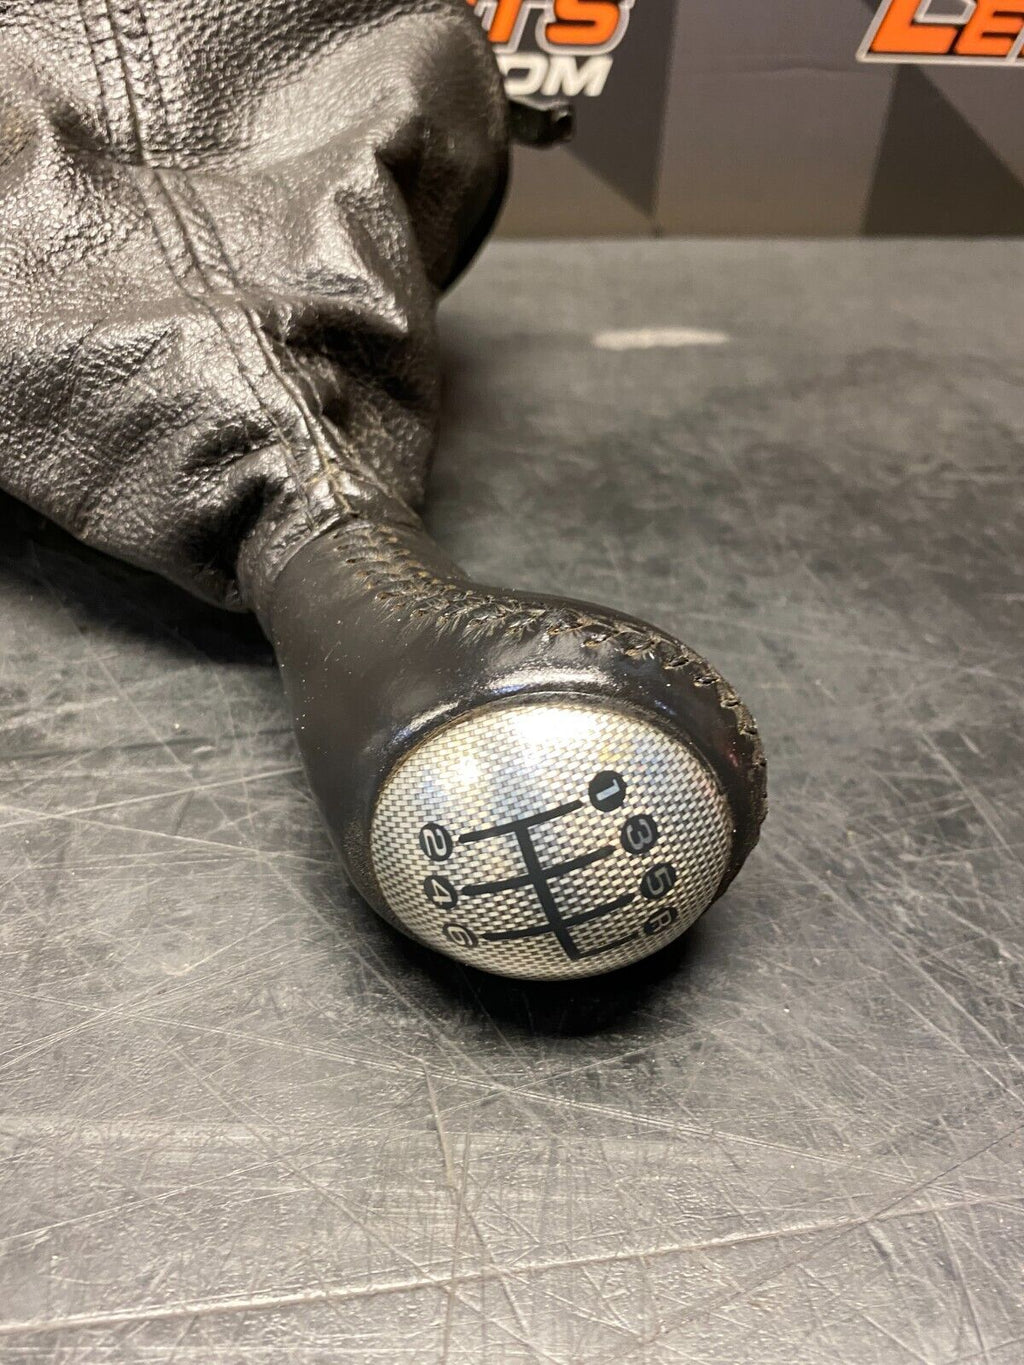 2006 CORVETTE C6 OEM SHIFT KNOB WITH BOOT COMBO PAIR USED